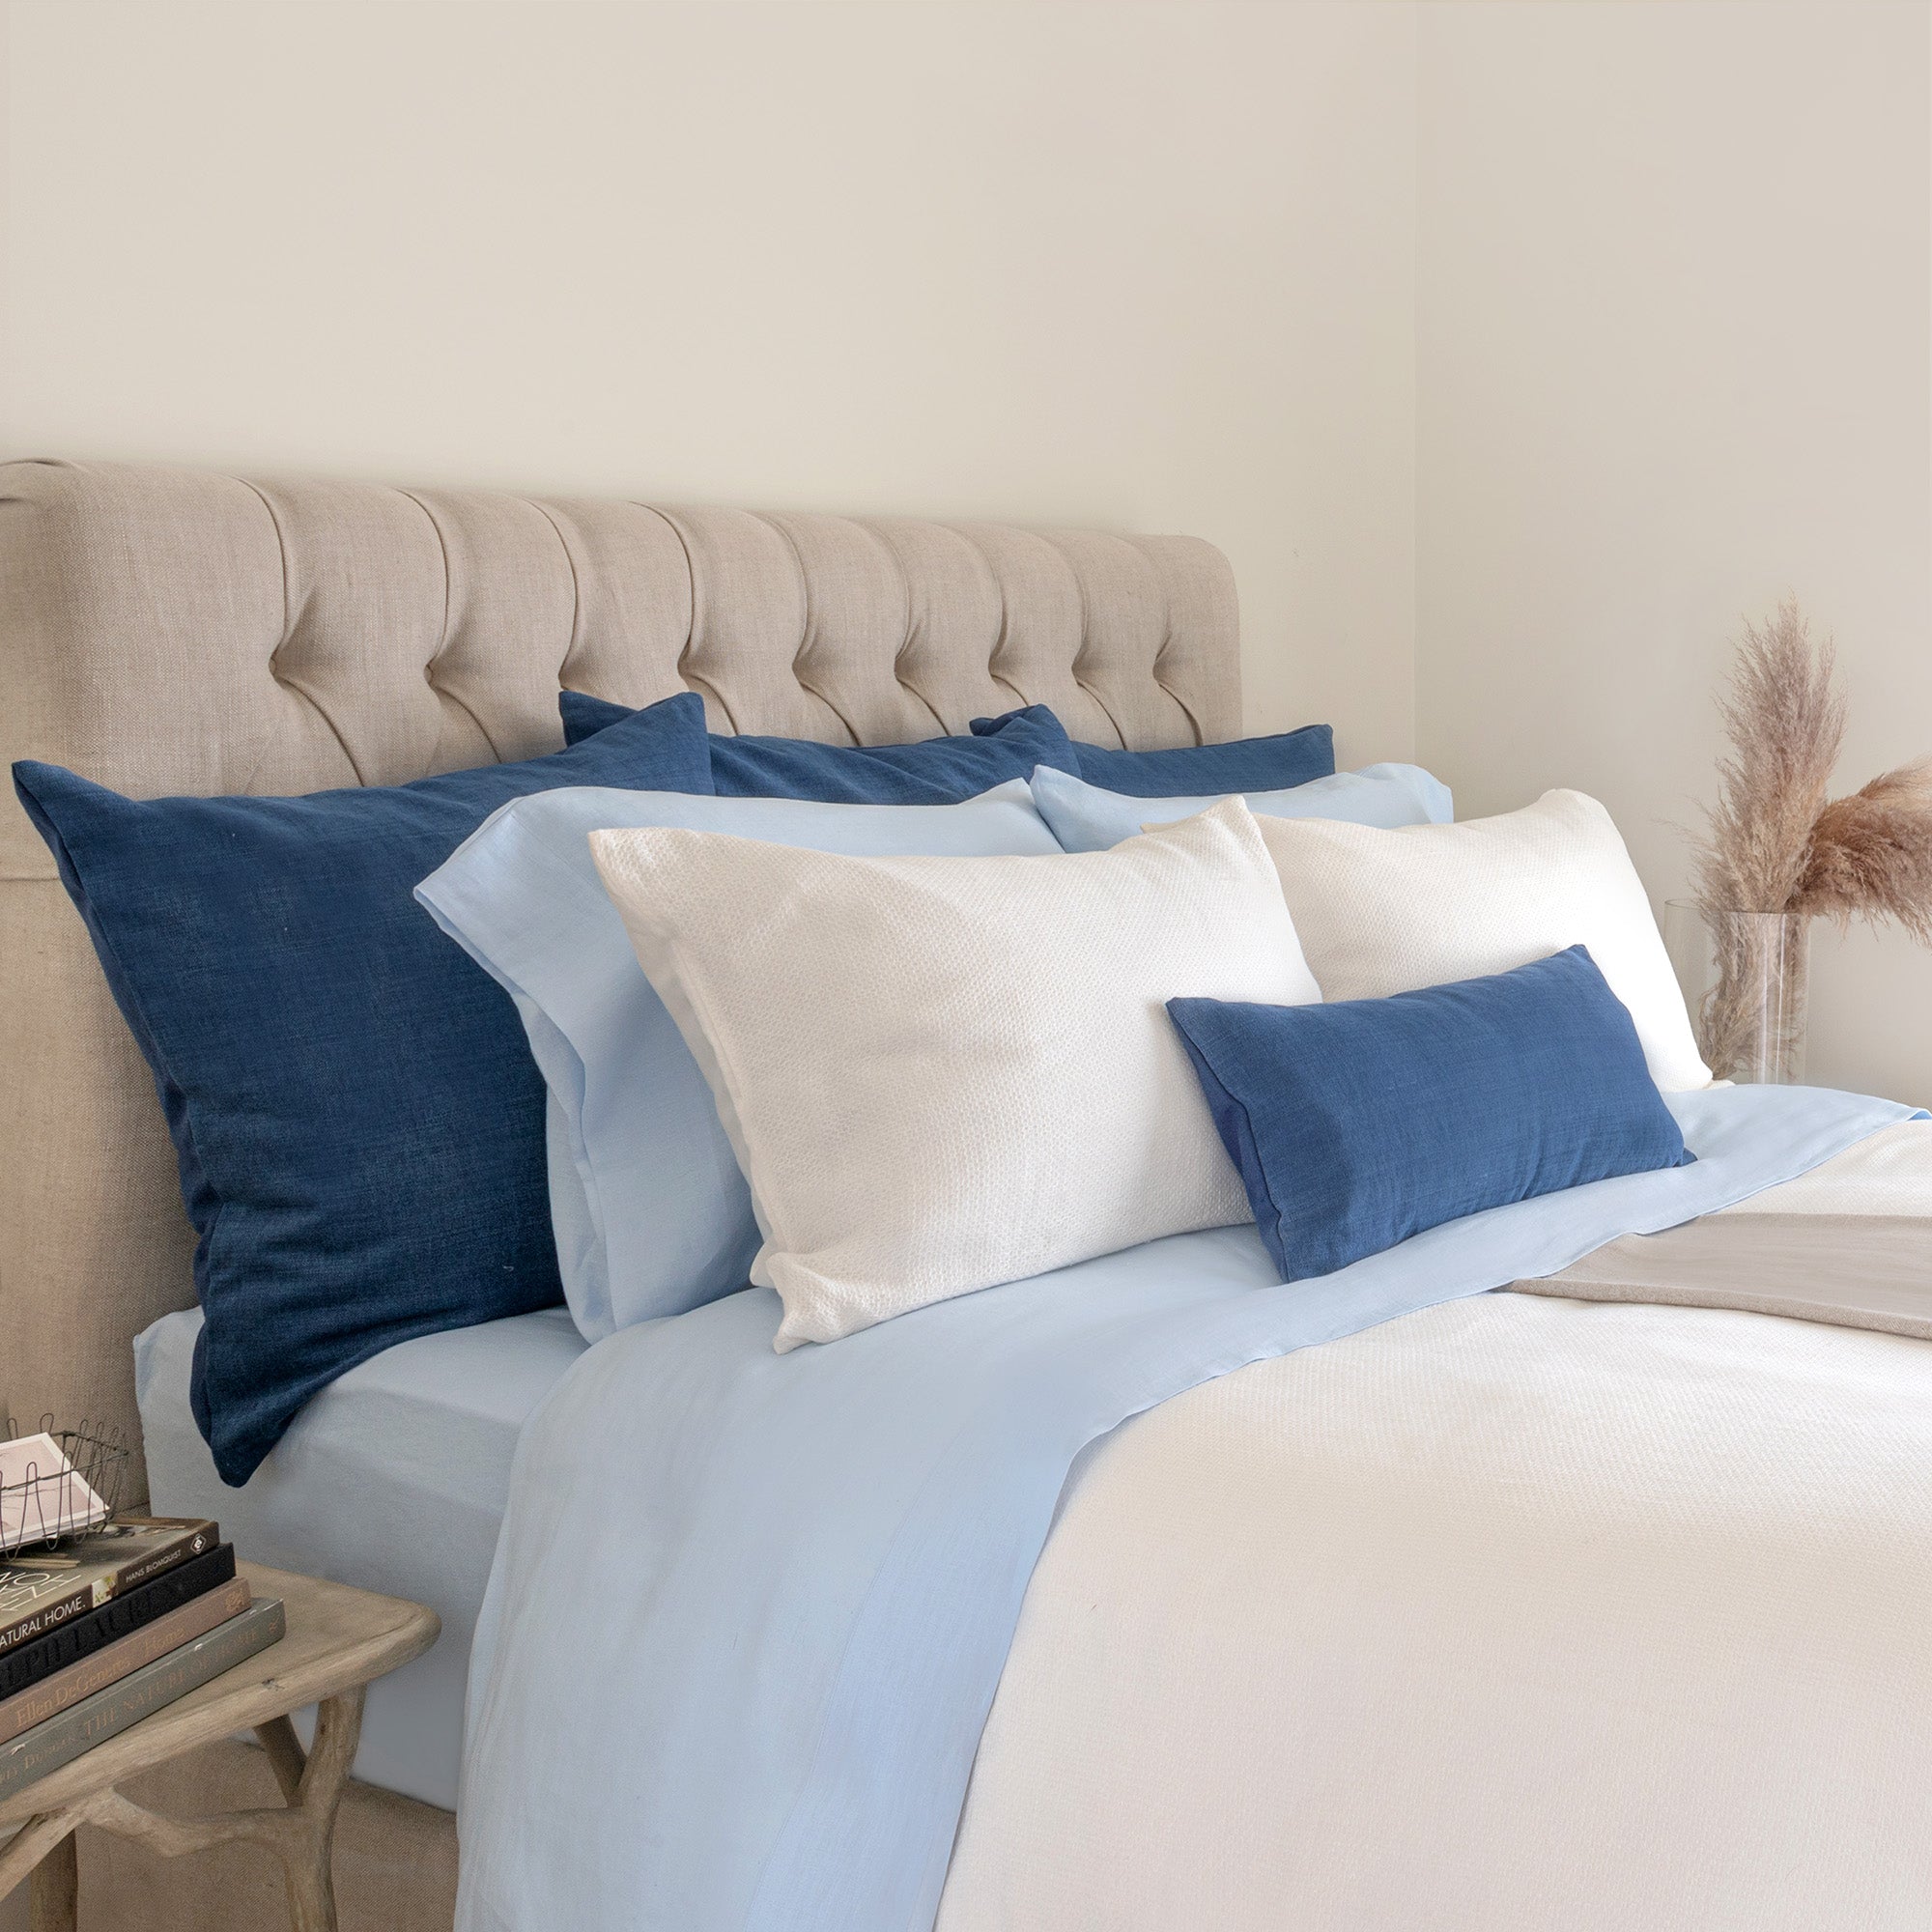 Avalon Bedding styled with Nicola Linen Sheets